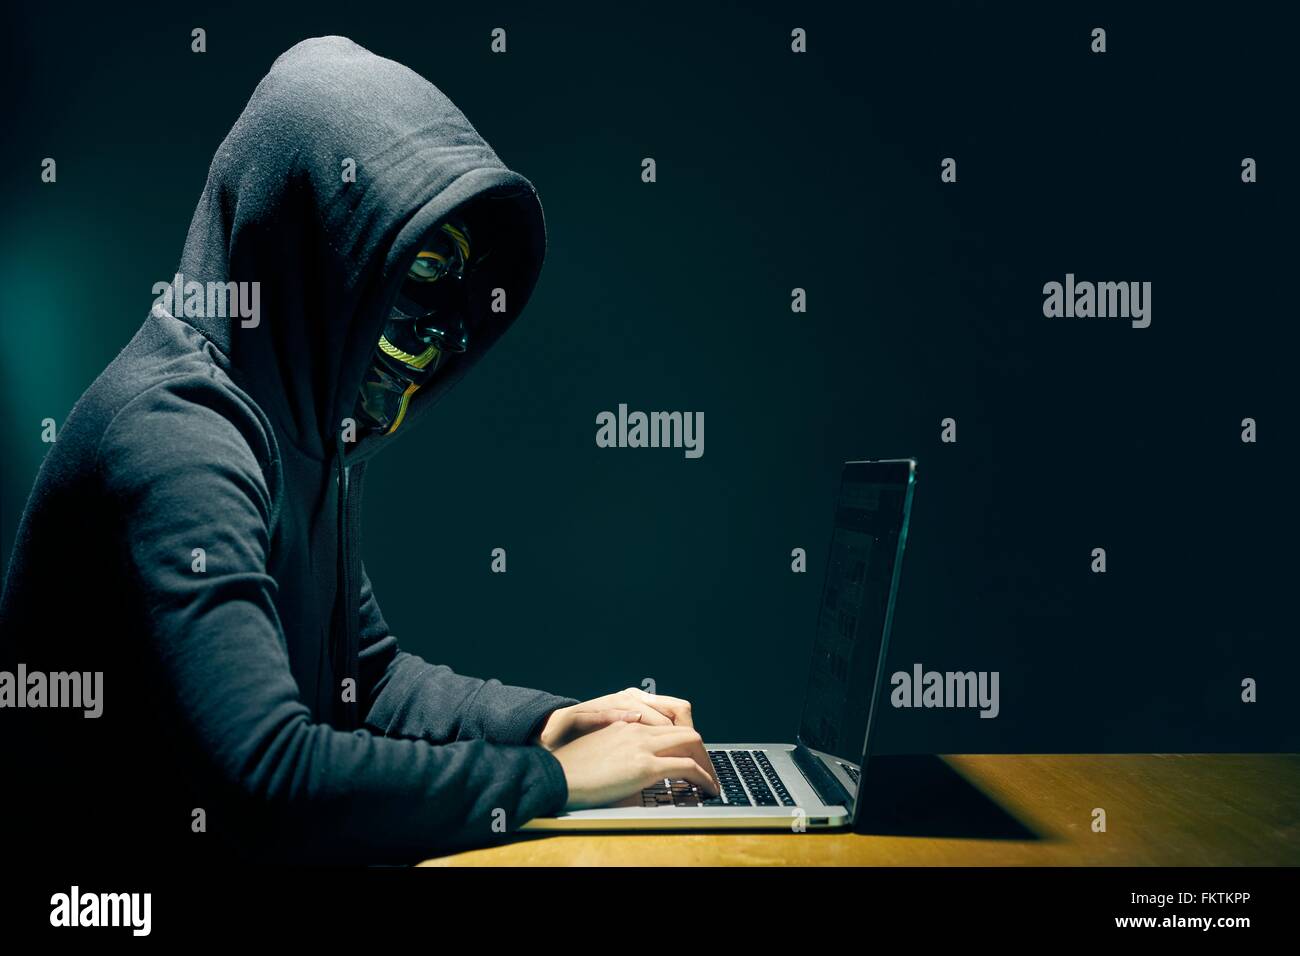 Side view   person wearing hooded top and Guy Fawkes face mask using laptop Stock Photo